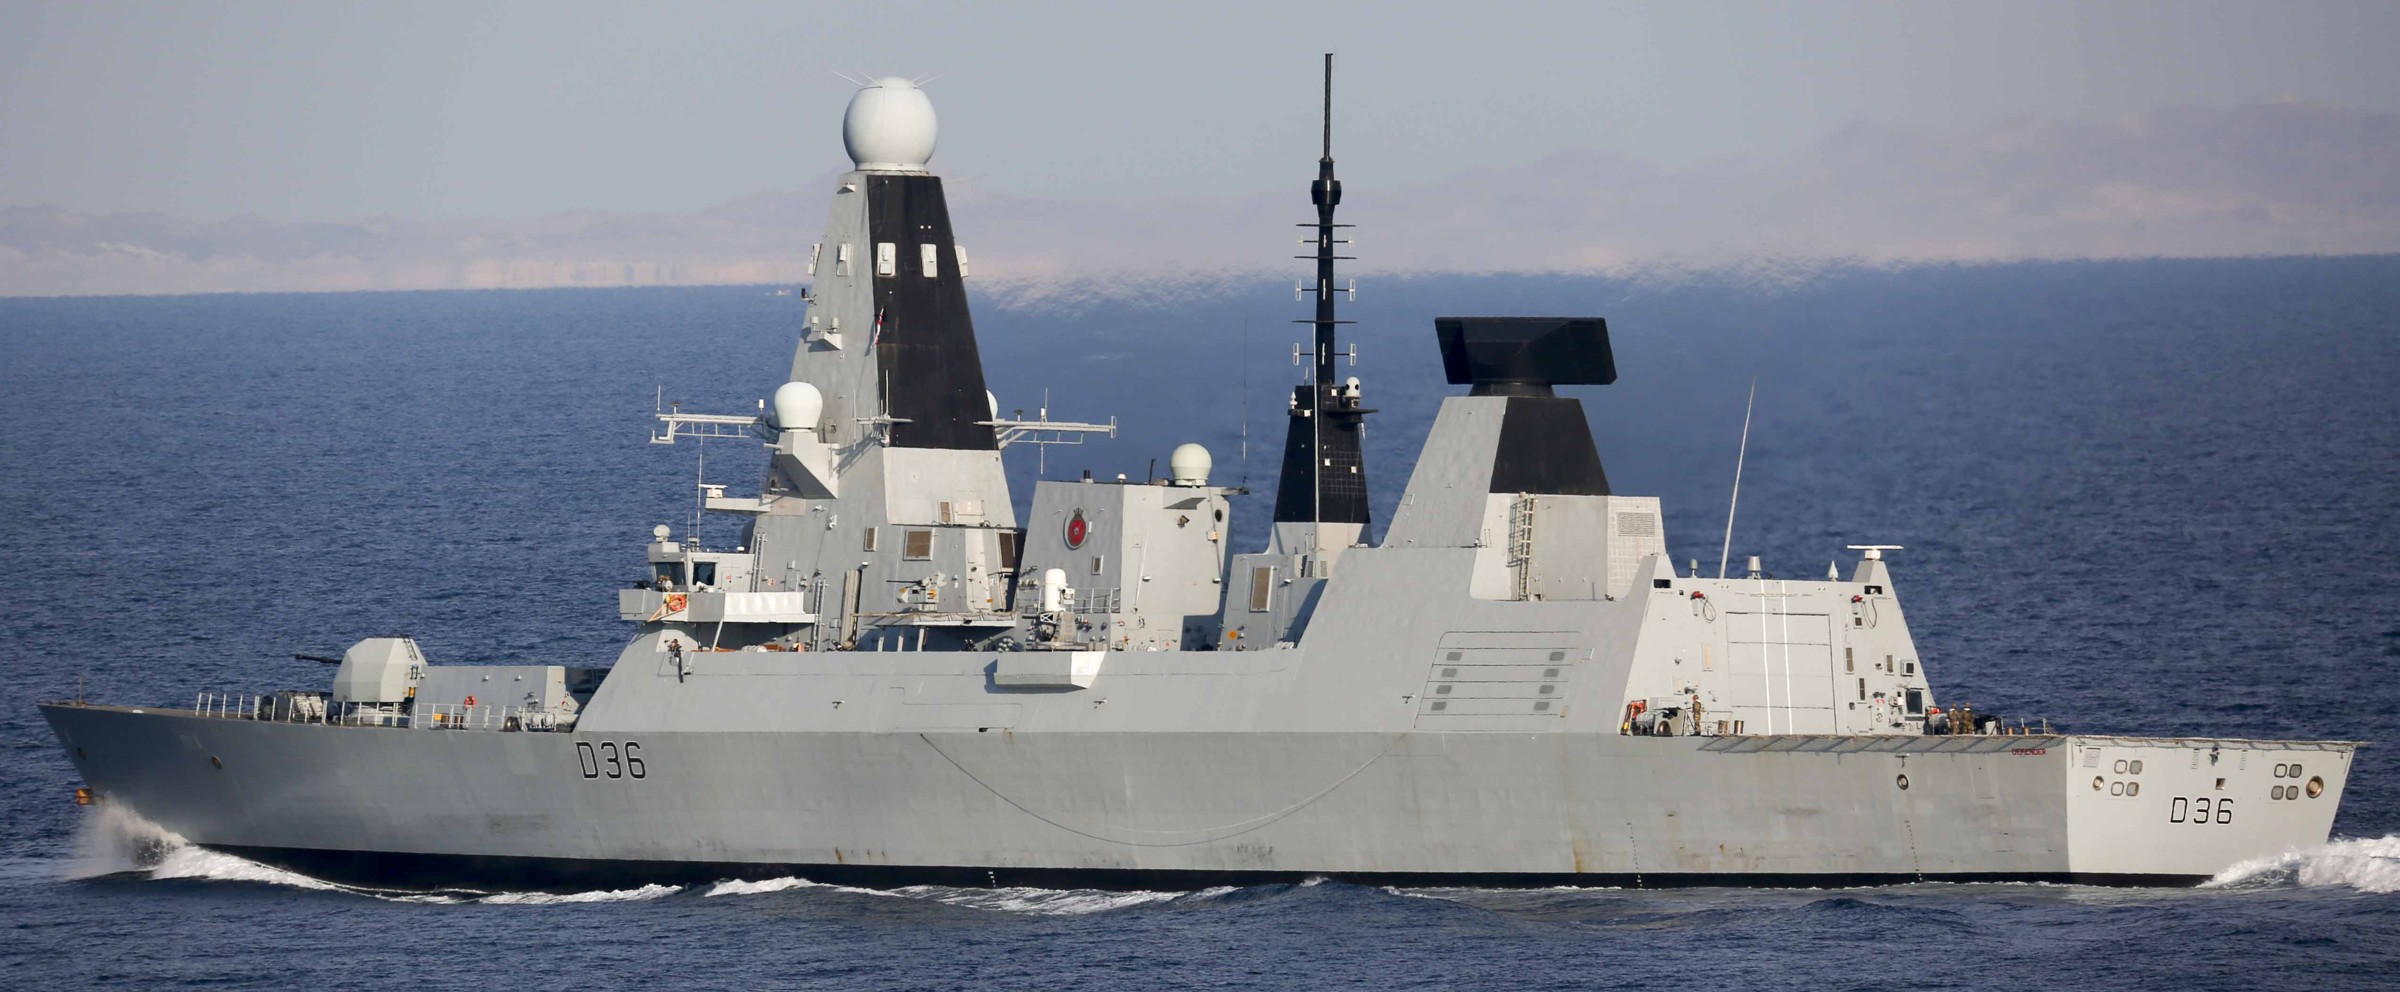 hms defender d-36 type 45 daring class guided missile destroyer ddg royal navy sea viper paams 11